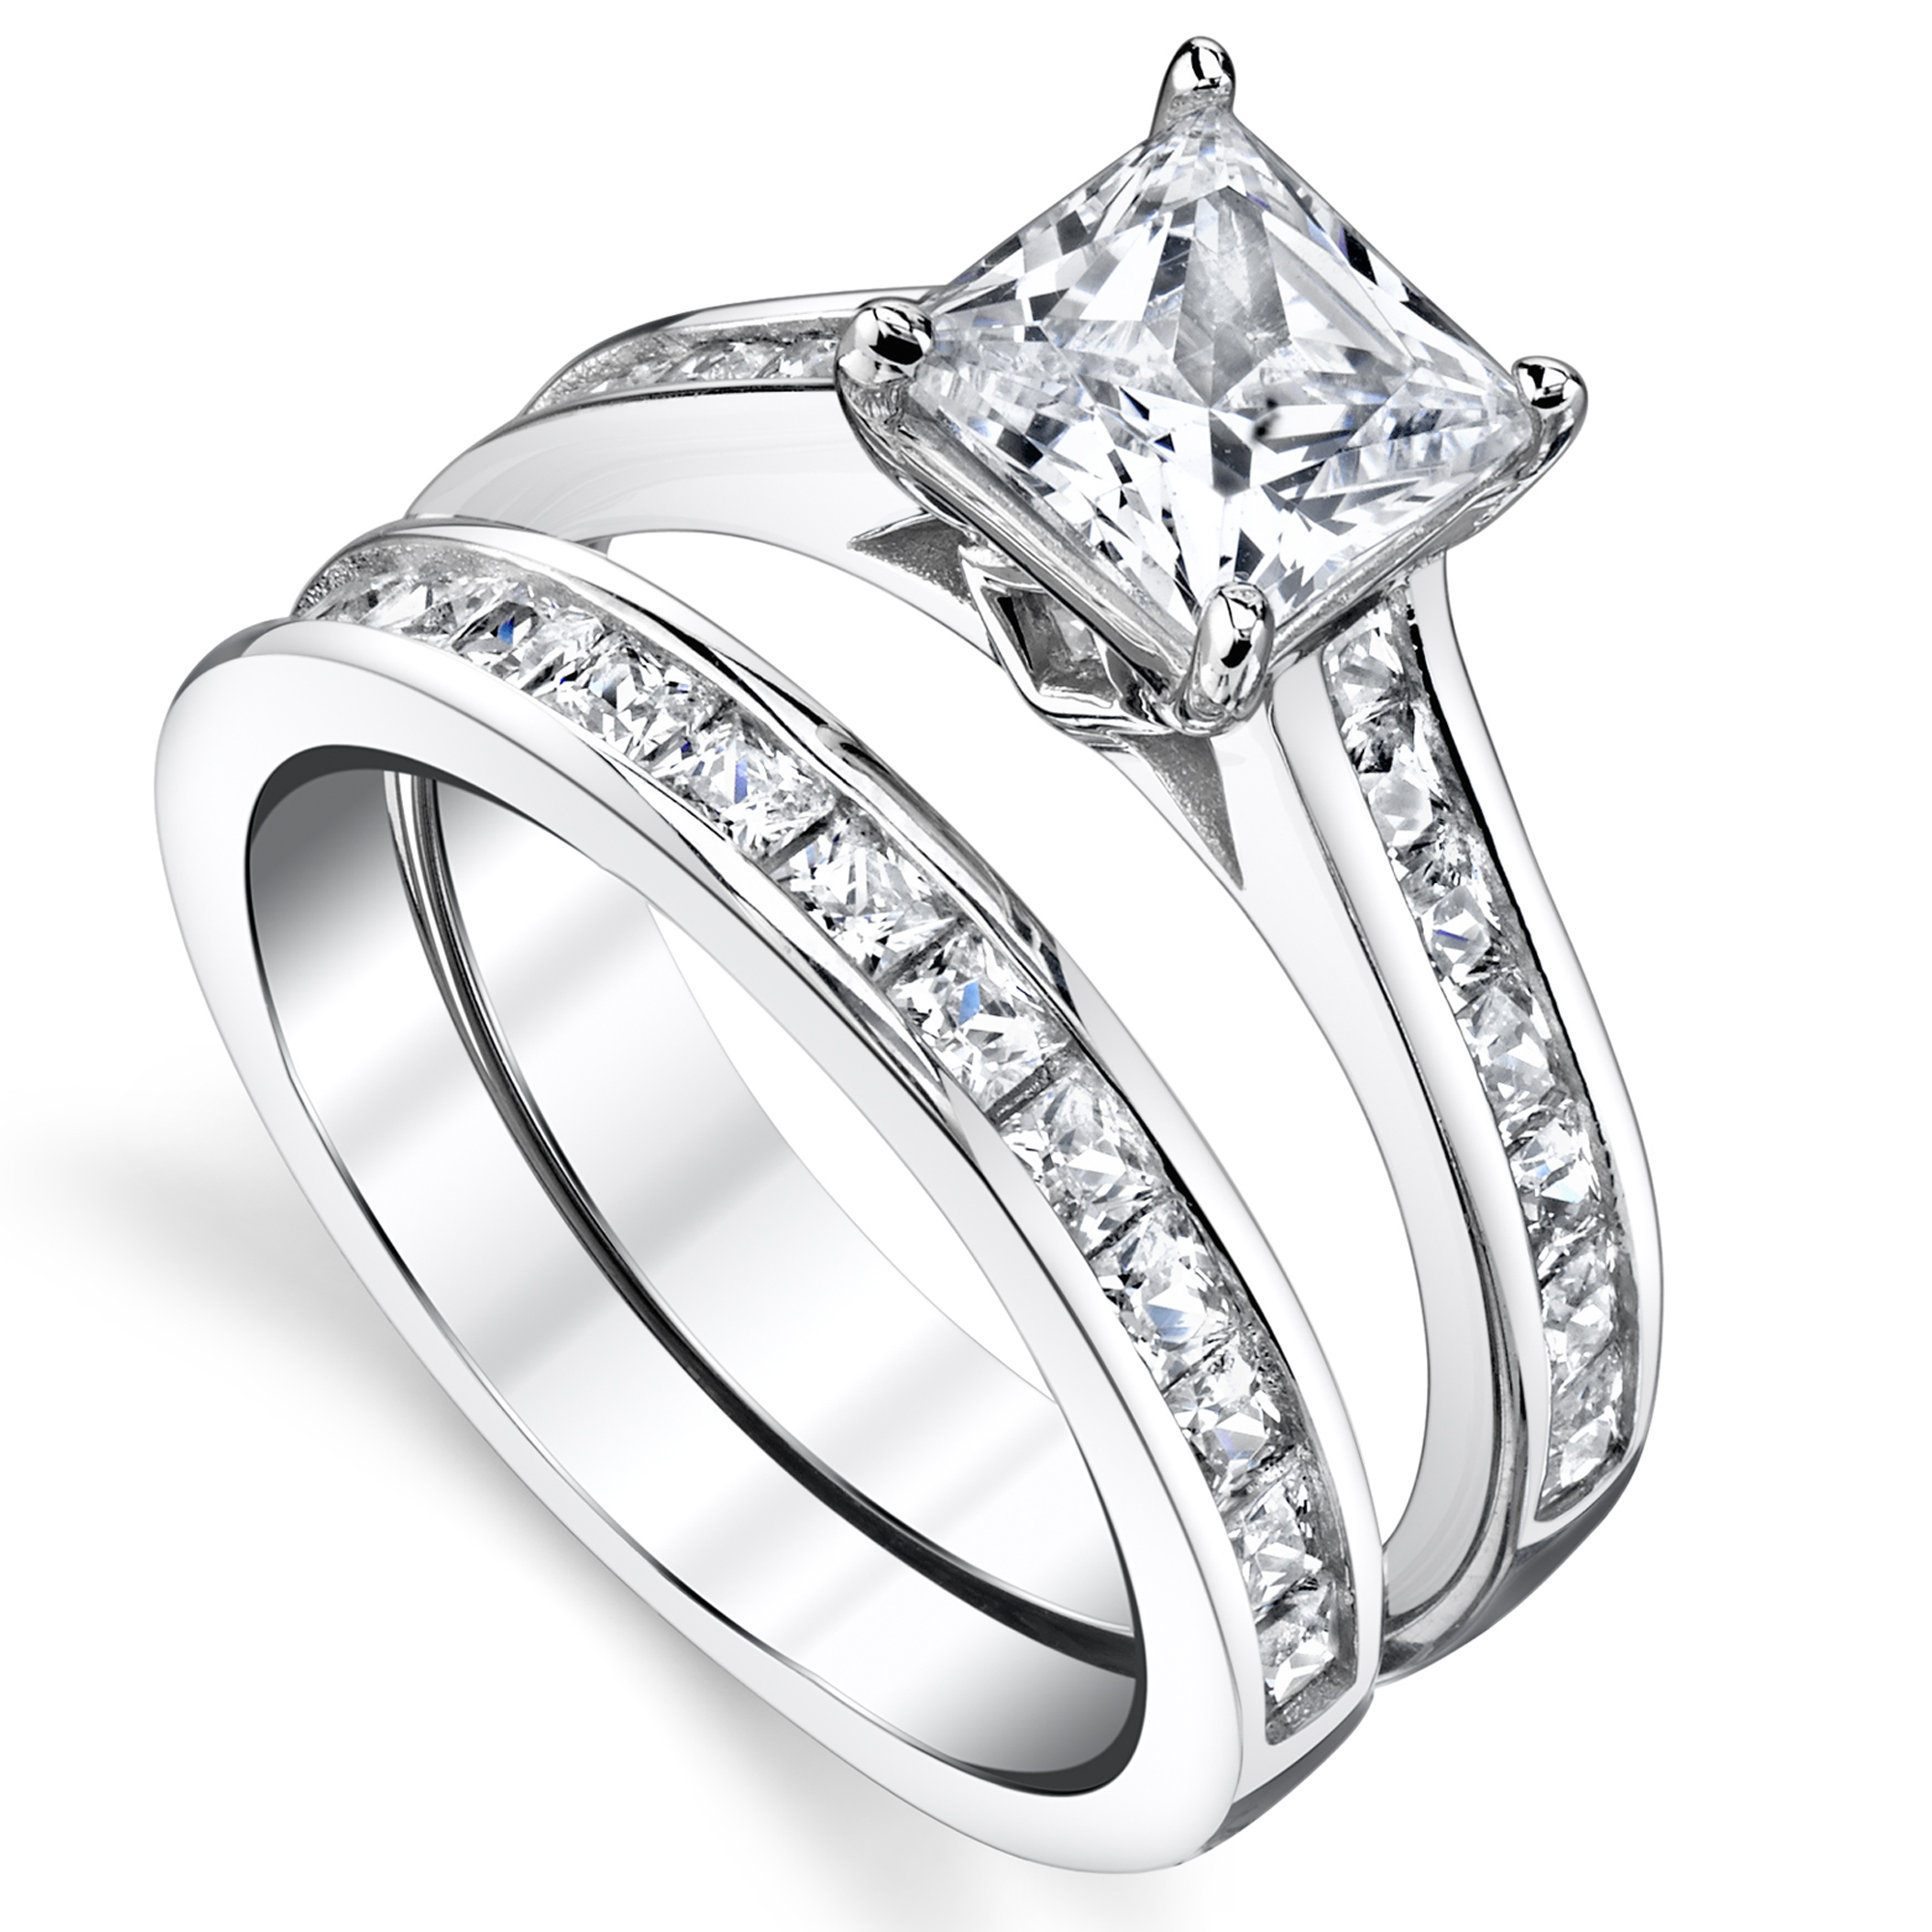 Metal Masters Womens 1.5 Carats Sterling Silver Bridal-Set Engagement Wedding Ring Cubic Zirconia 8MM - image 2 of 7